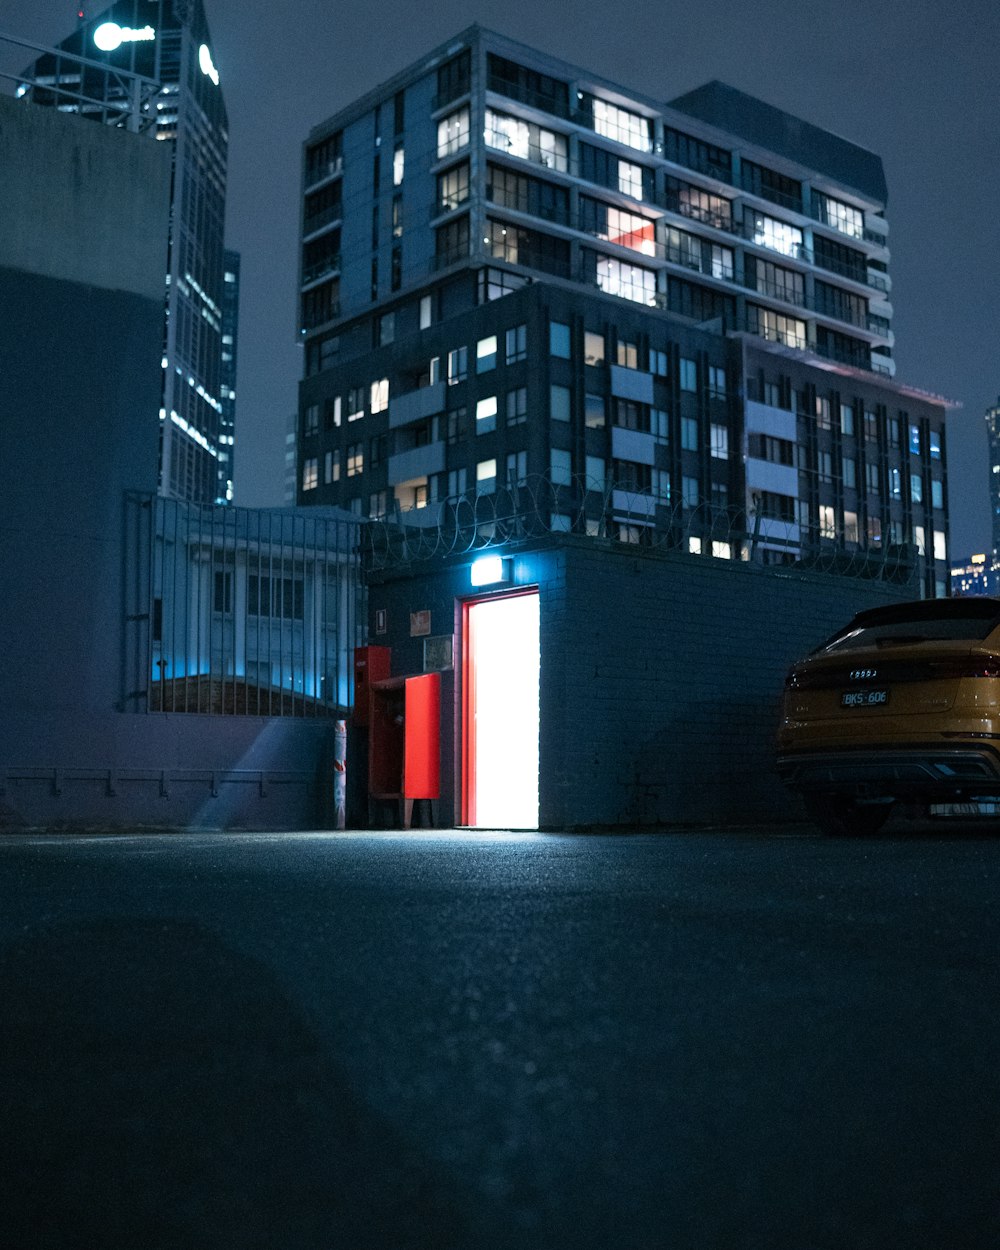 a car parked in front of a tall building at night